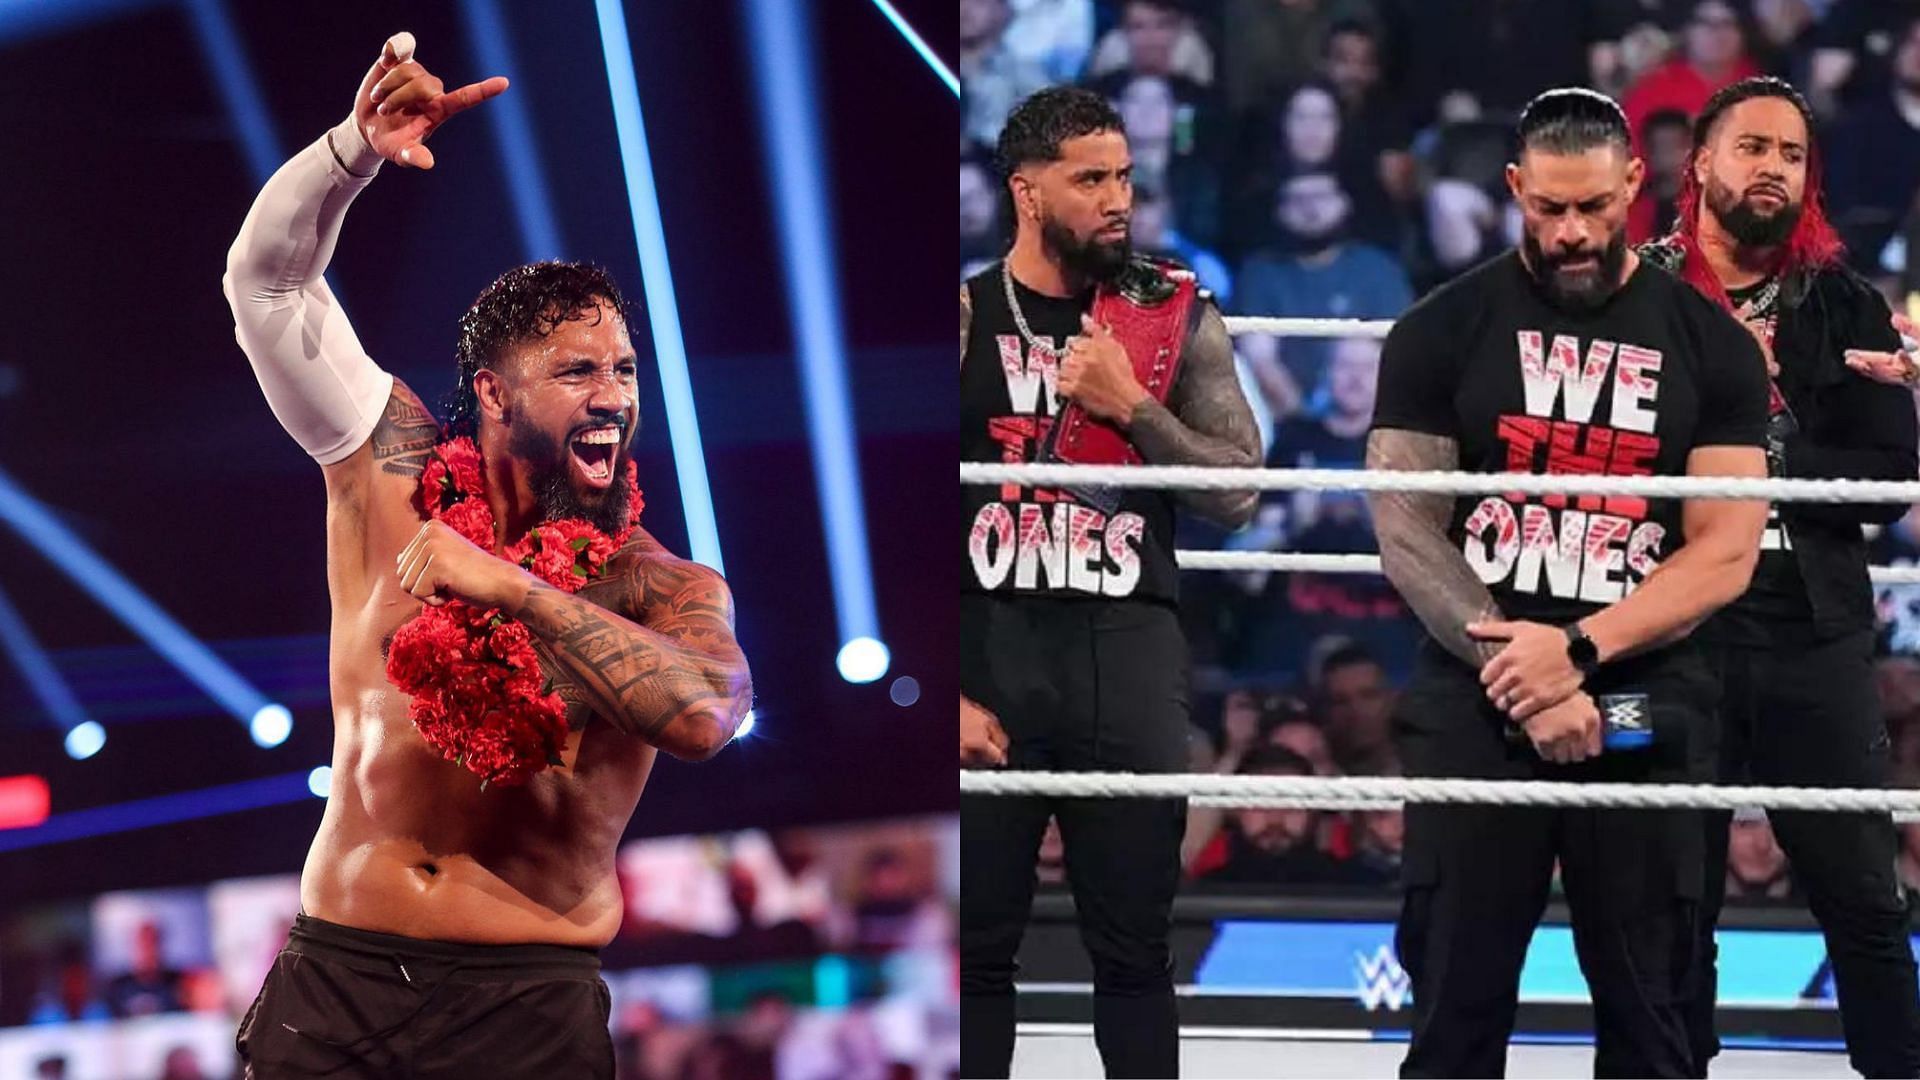 Jey Uso recently reunited with The Bloodline